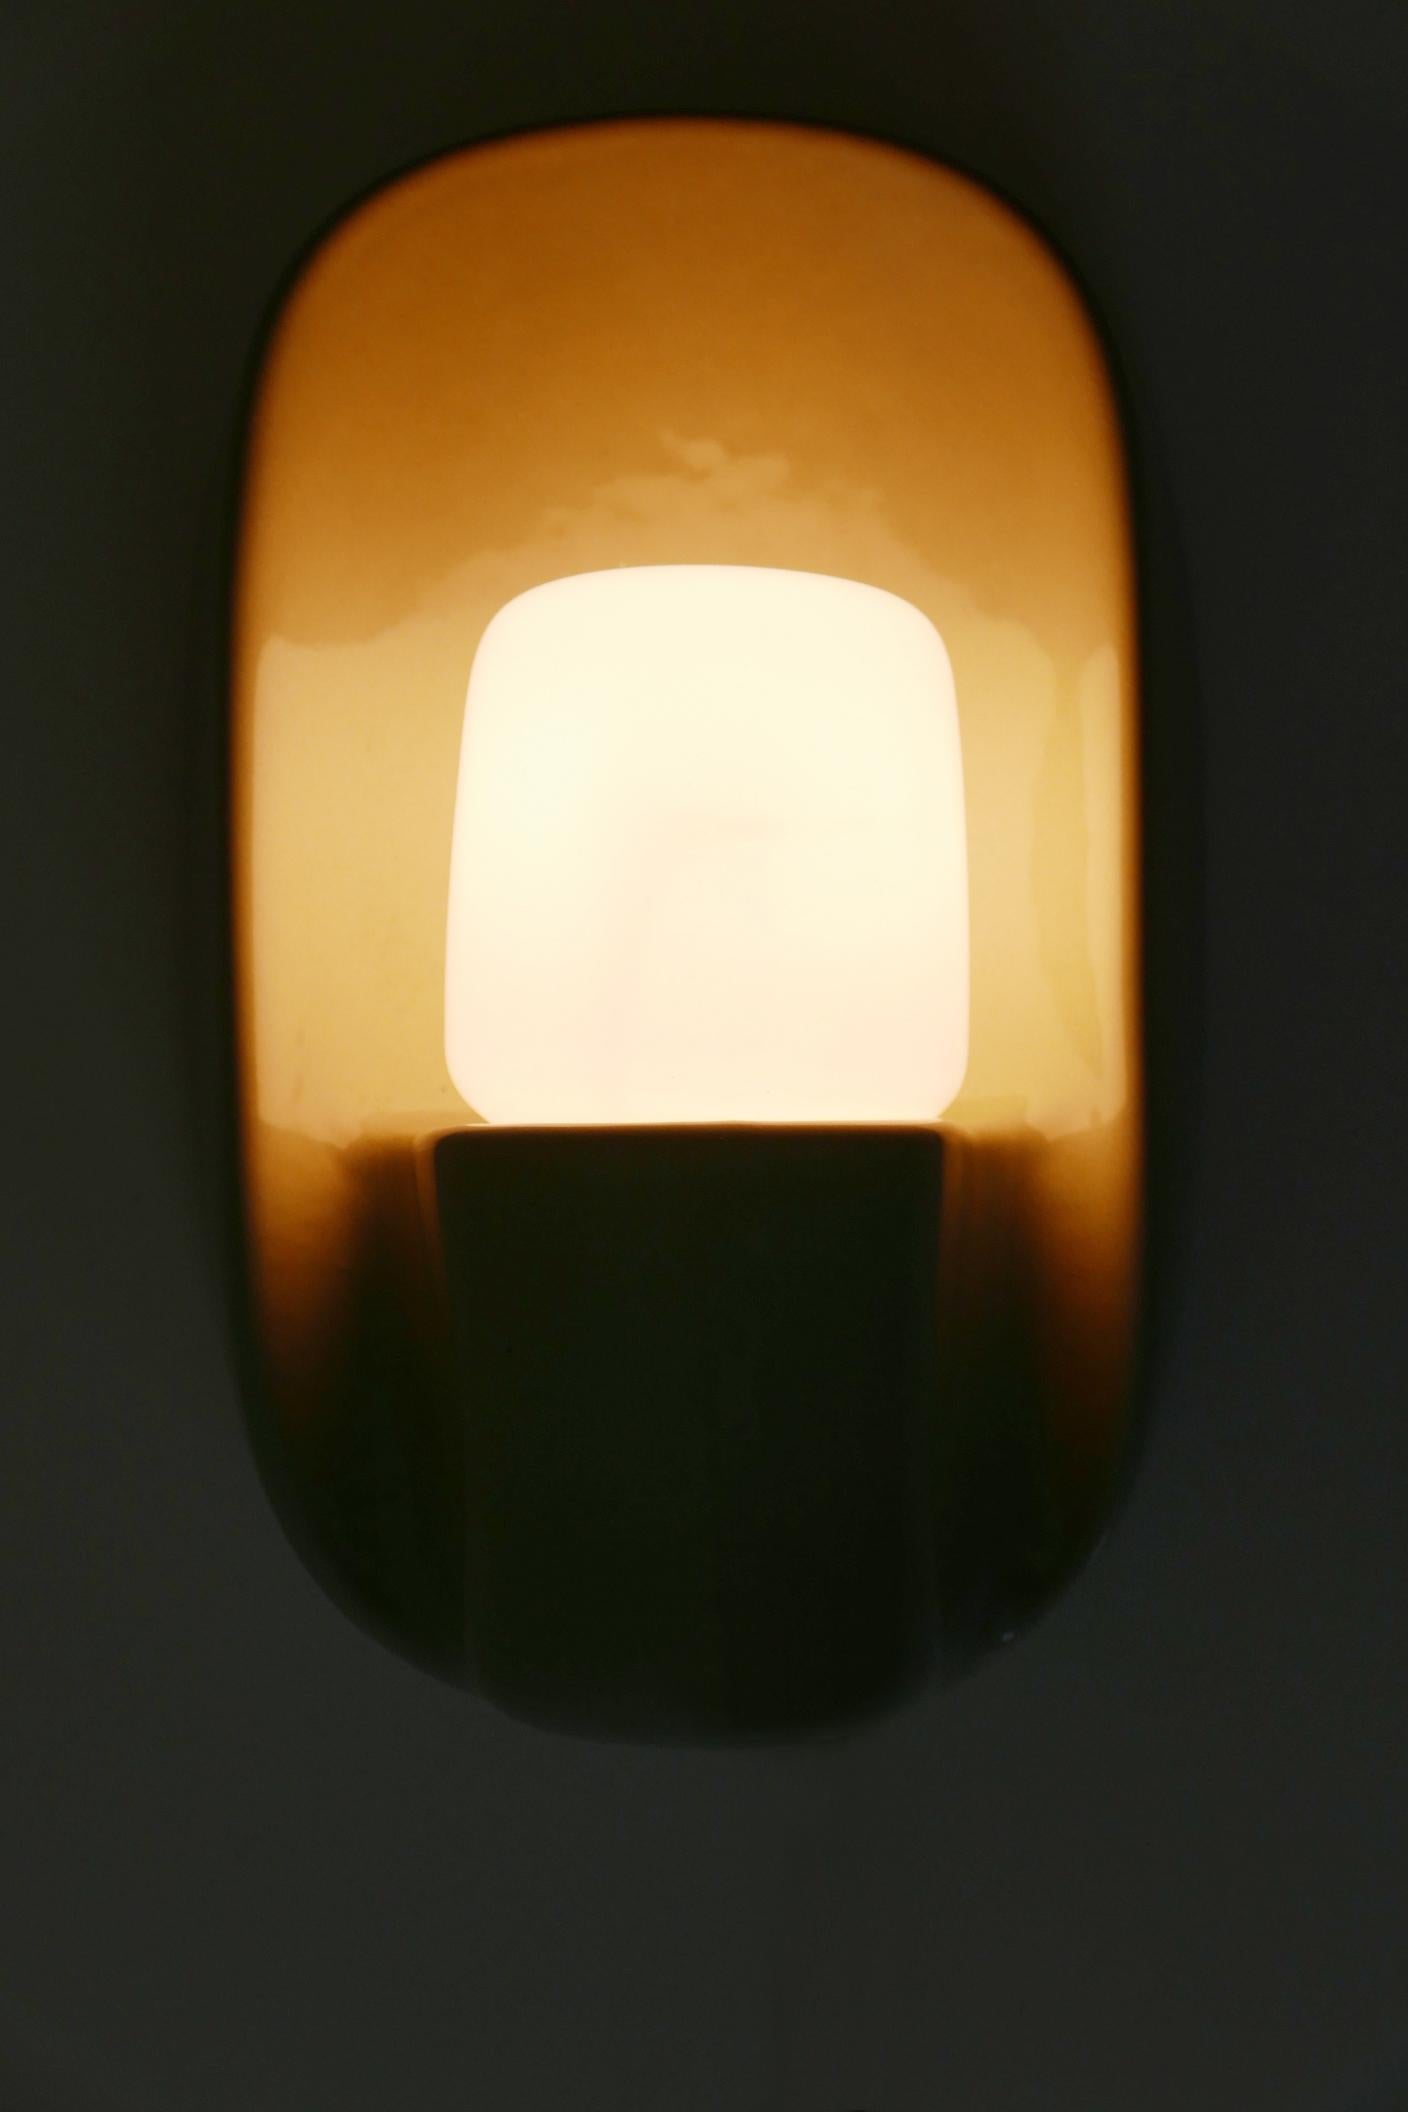 Glazed Ceramic Systral Wall Lamp or Sconce 6458 by Wilhelm Wagenfeld for Lindner, 1970